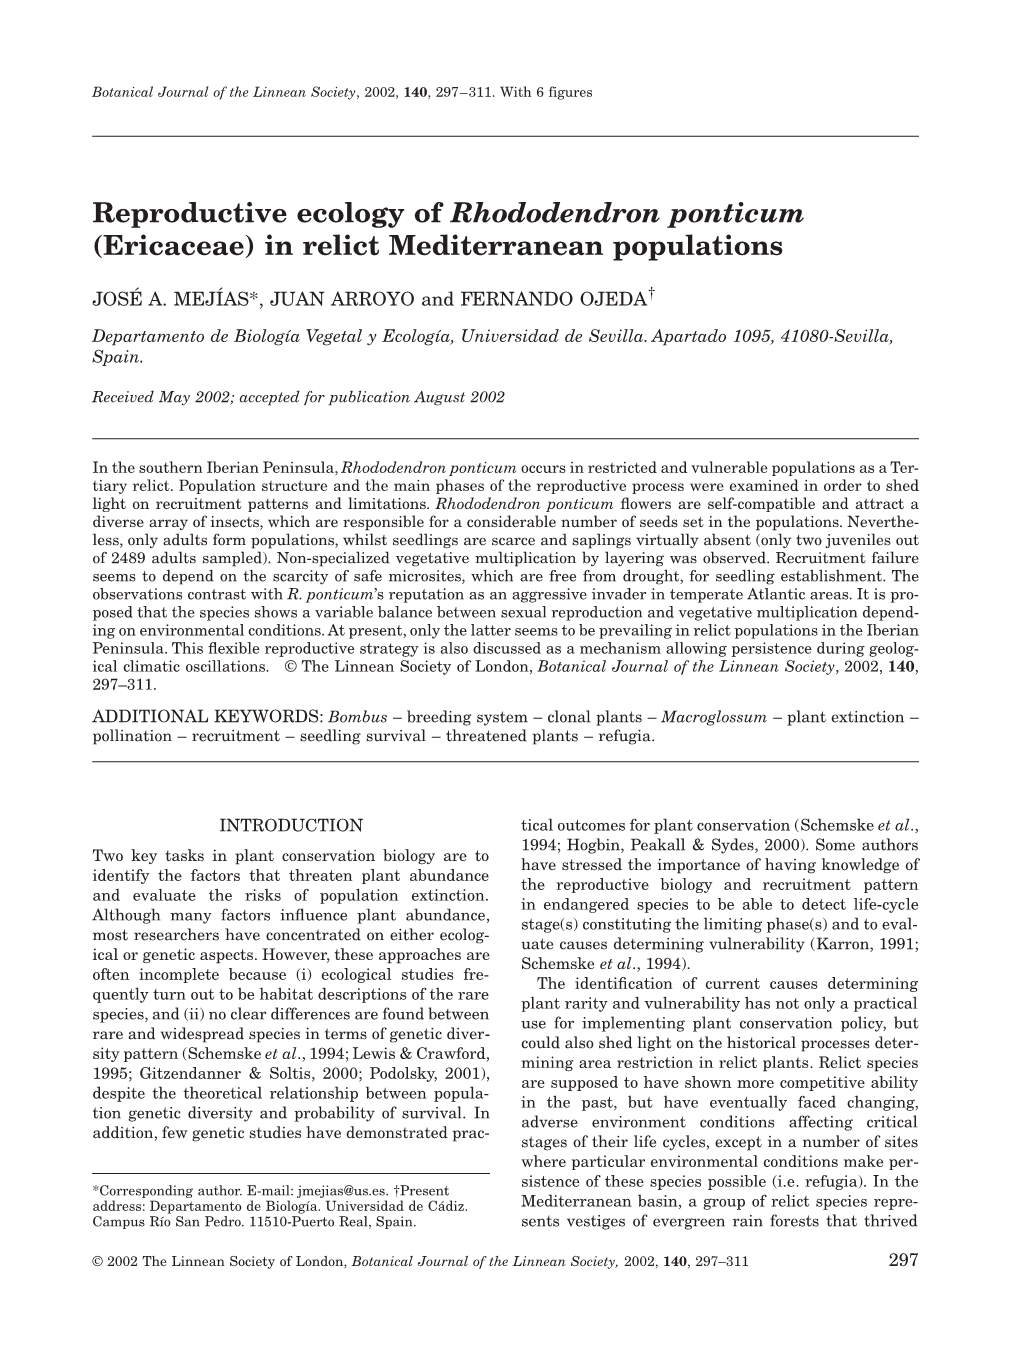 Reproductive Ecology of Rhododendron Ponticum (Ericaceae) in Relict Mediterranean Populations